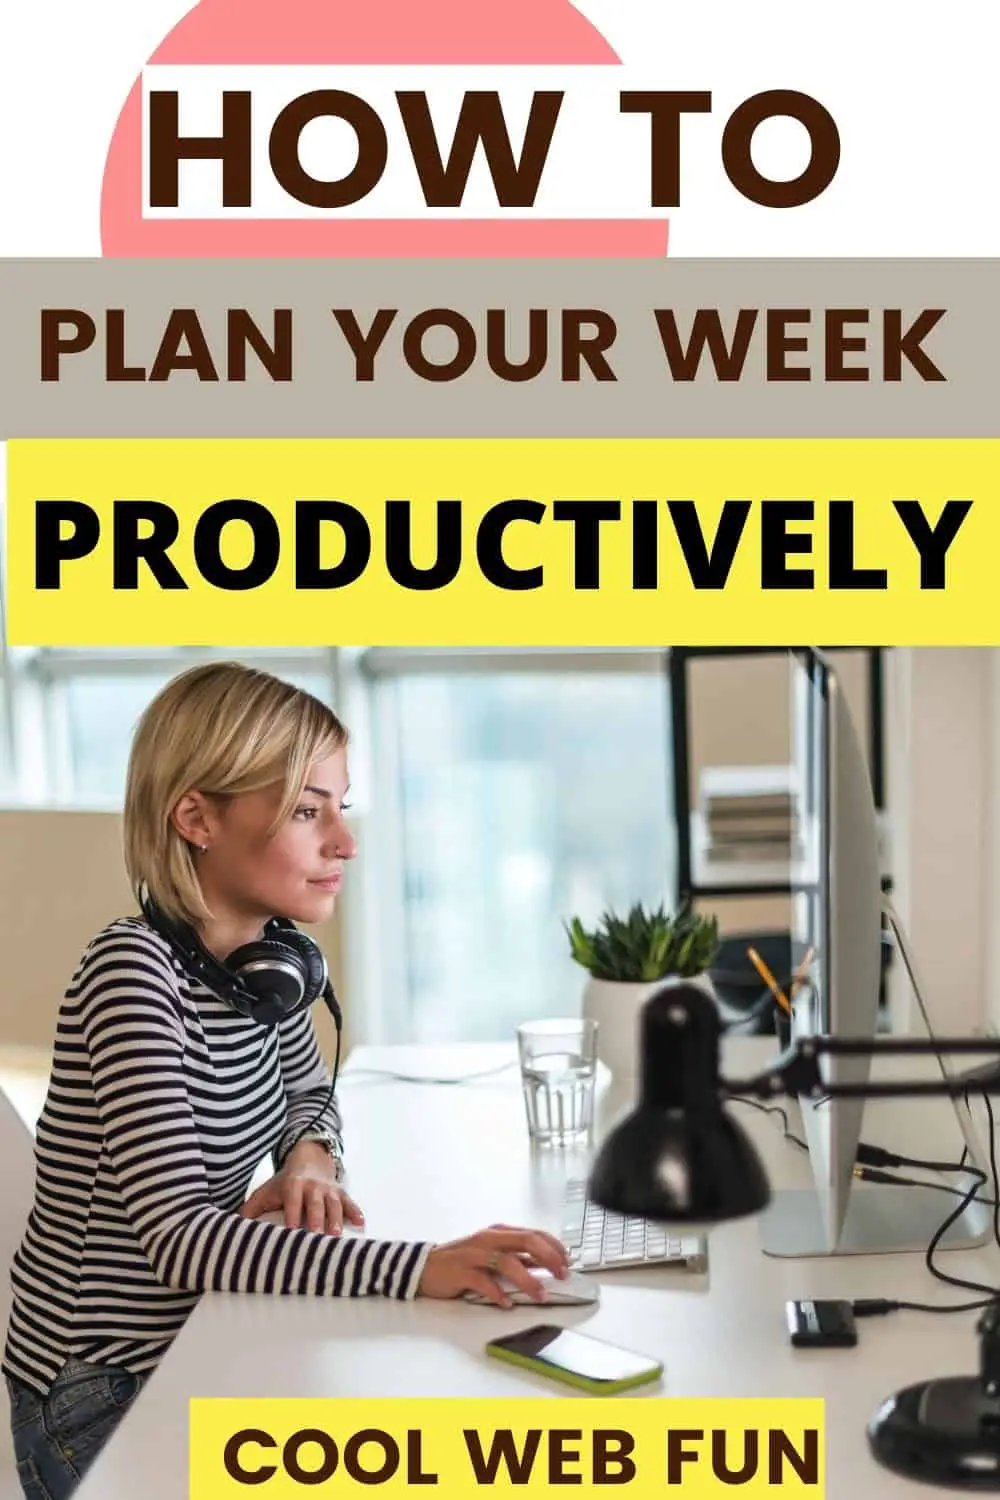 PLAN YOUR WEEK PRODUCTIVELY